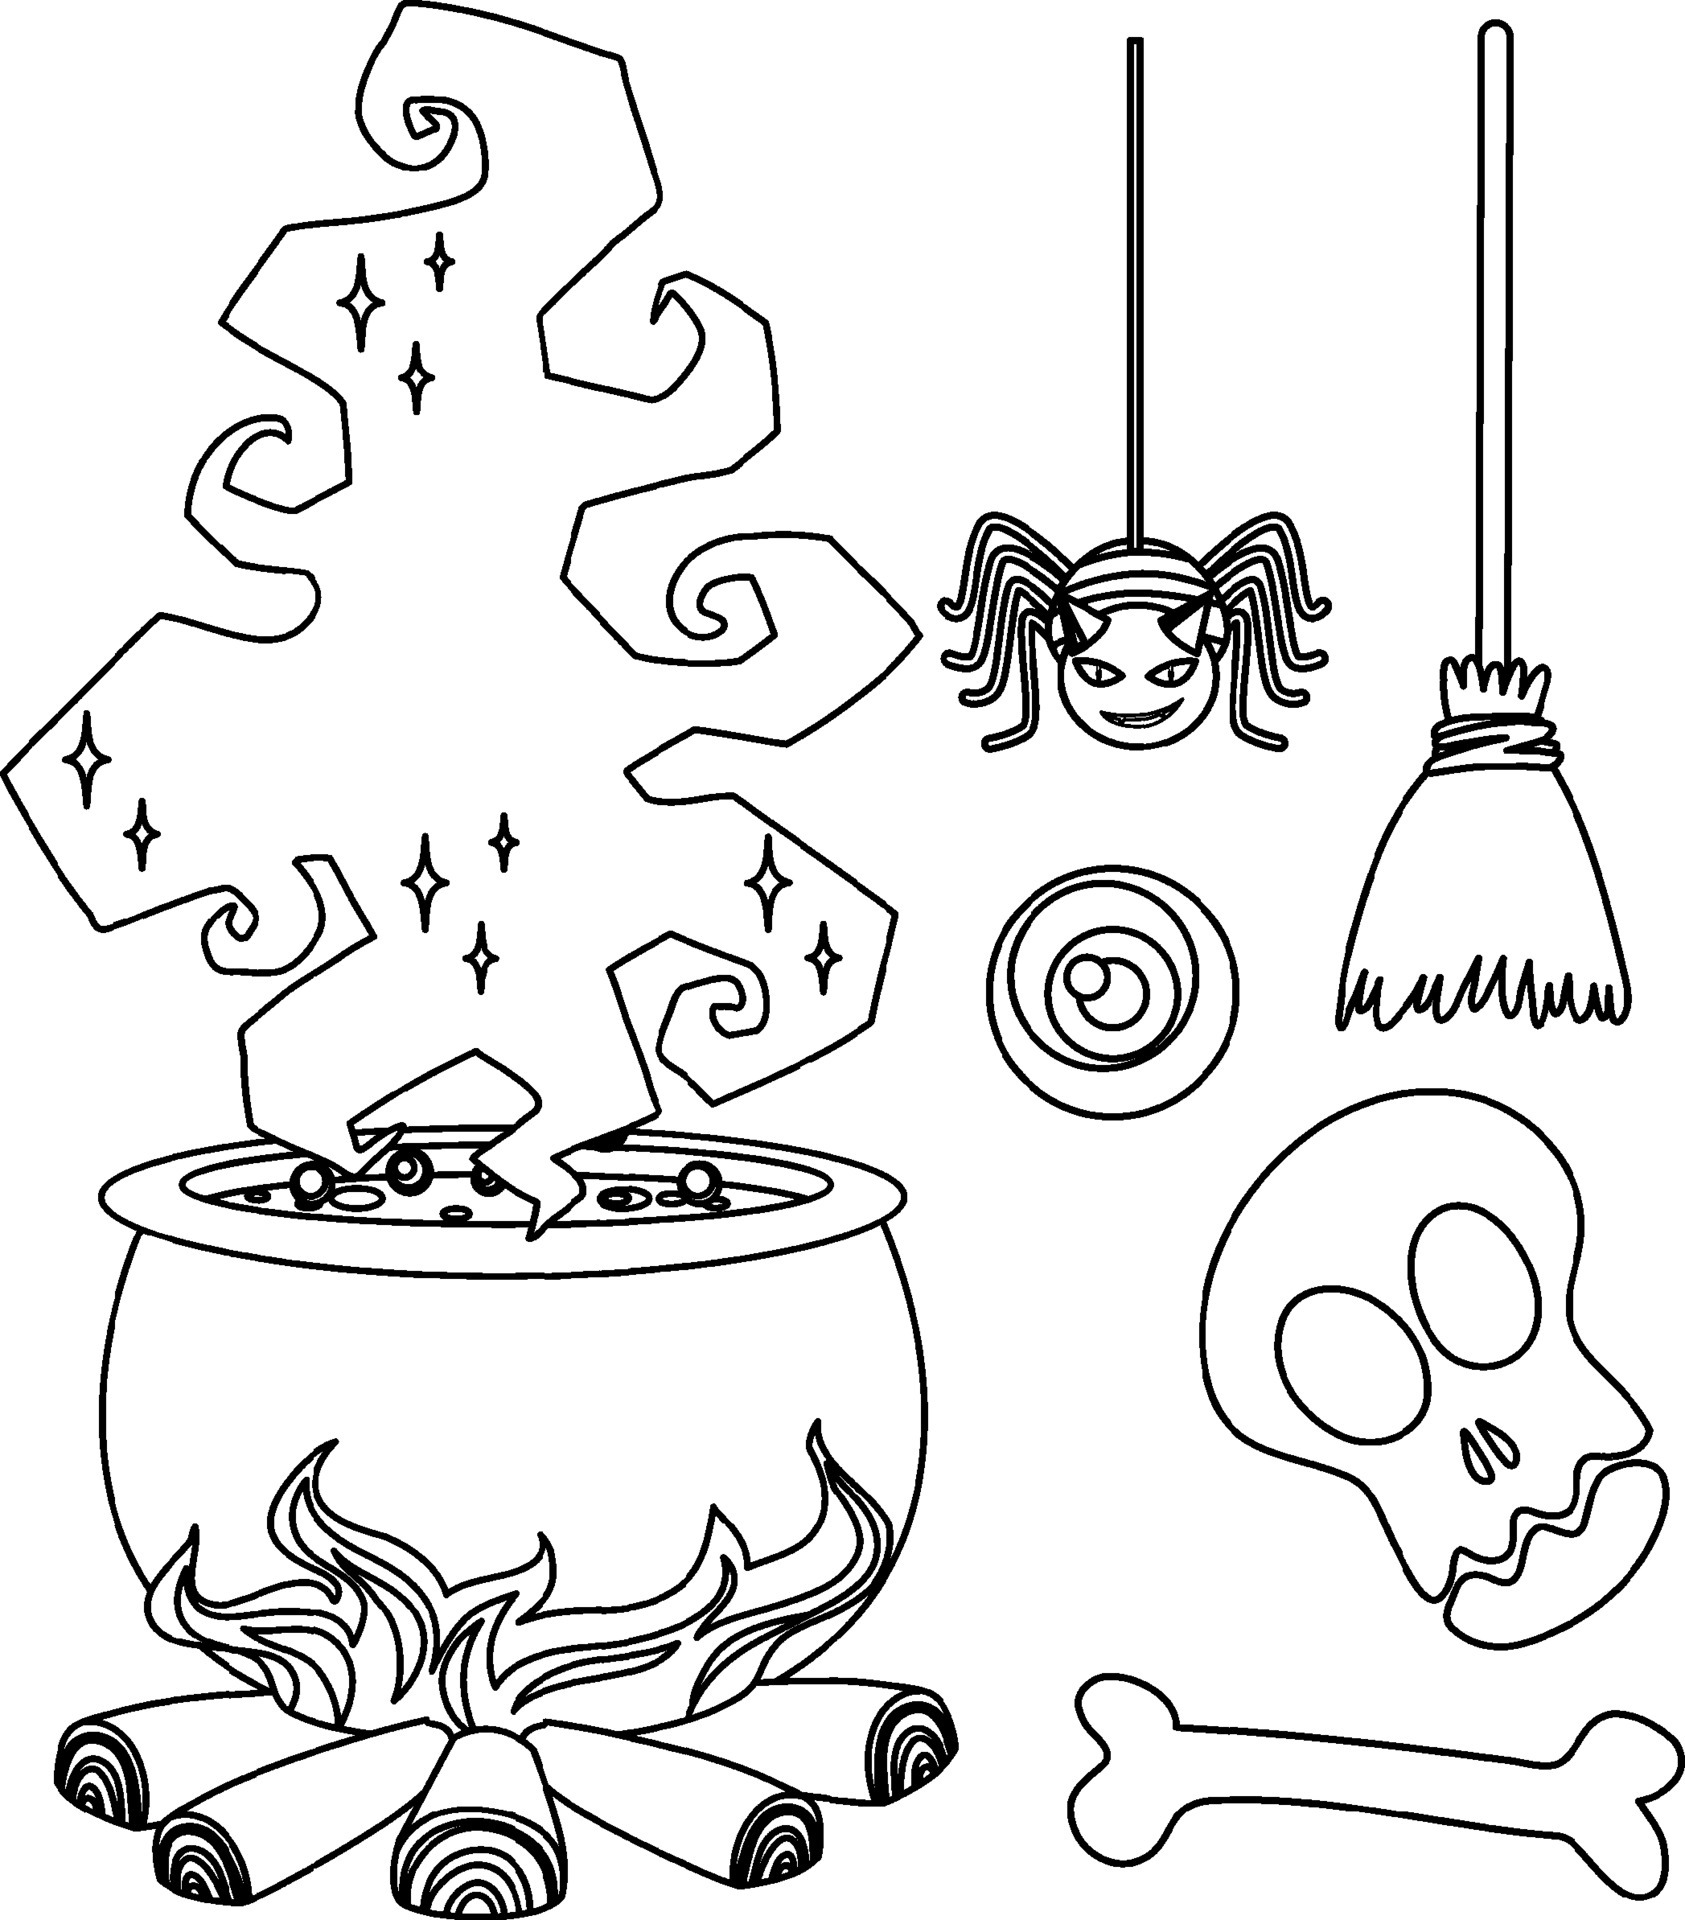 Halloween object black and white doodle character 7109250 Vector Art at ...